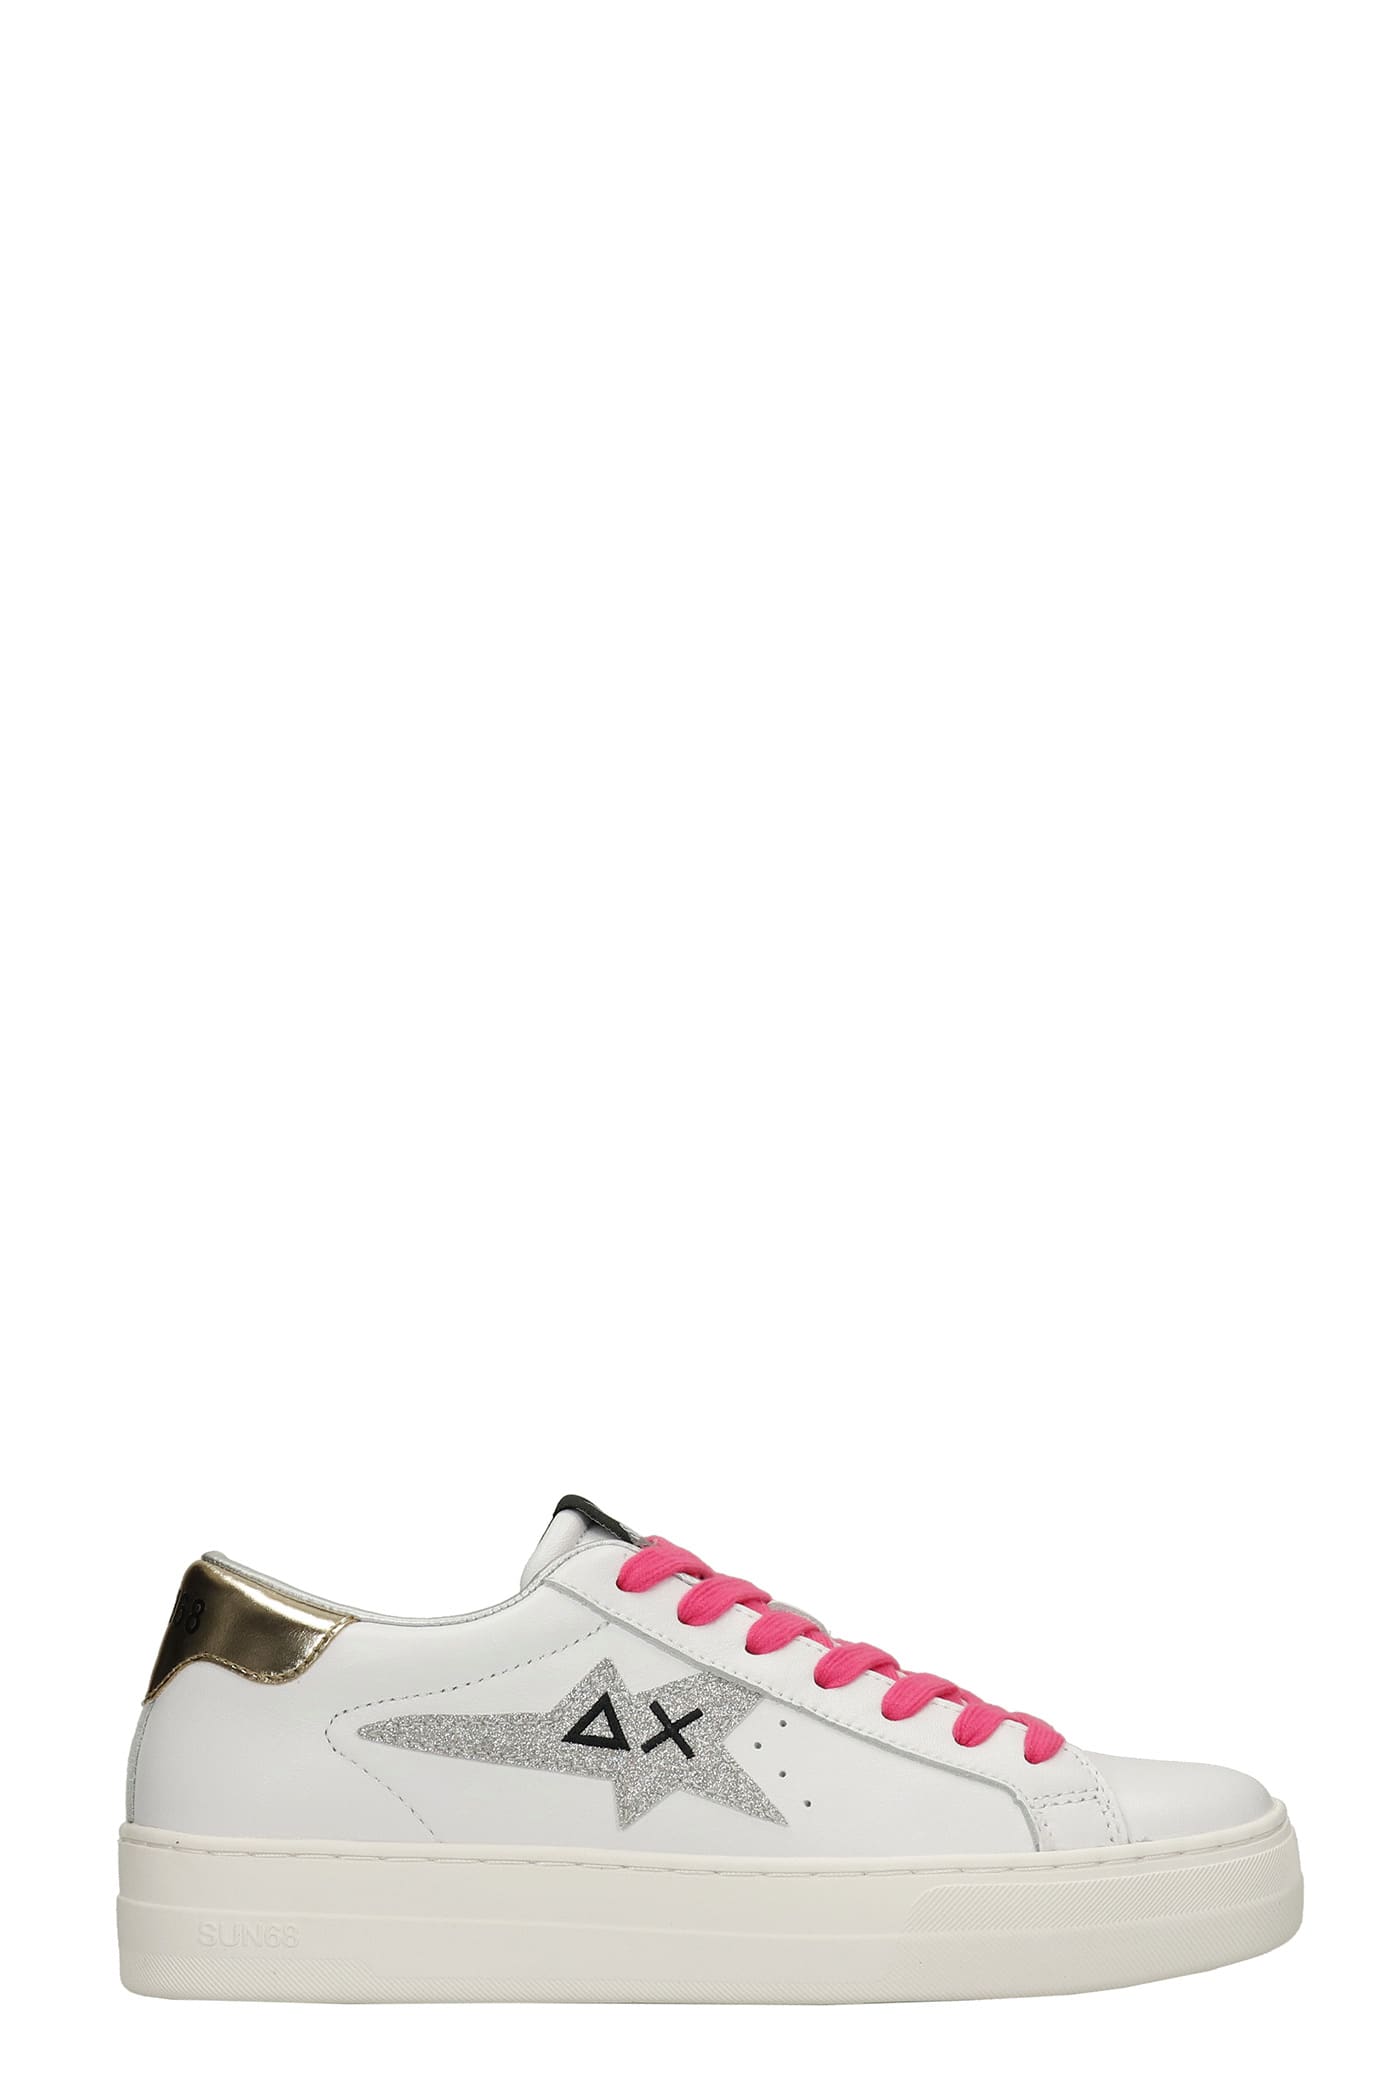 Sun 68 Betty Sneakers In White Leather